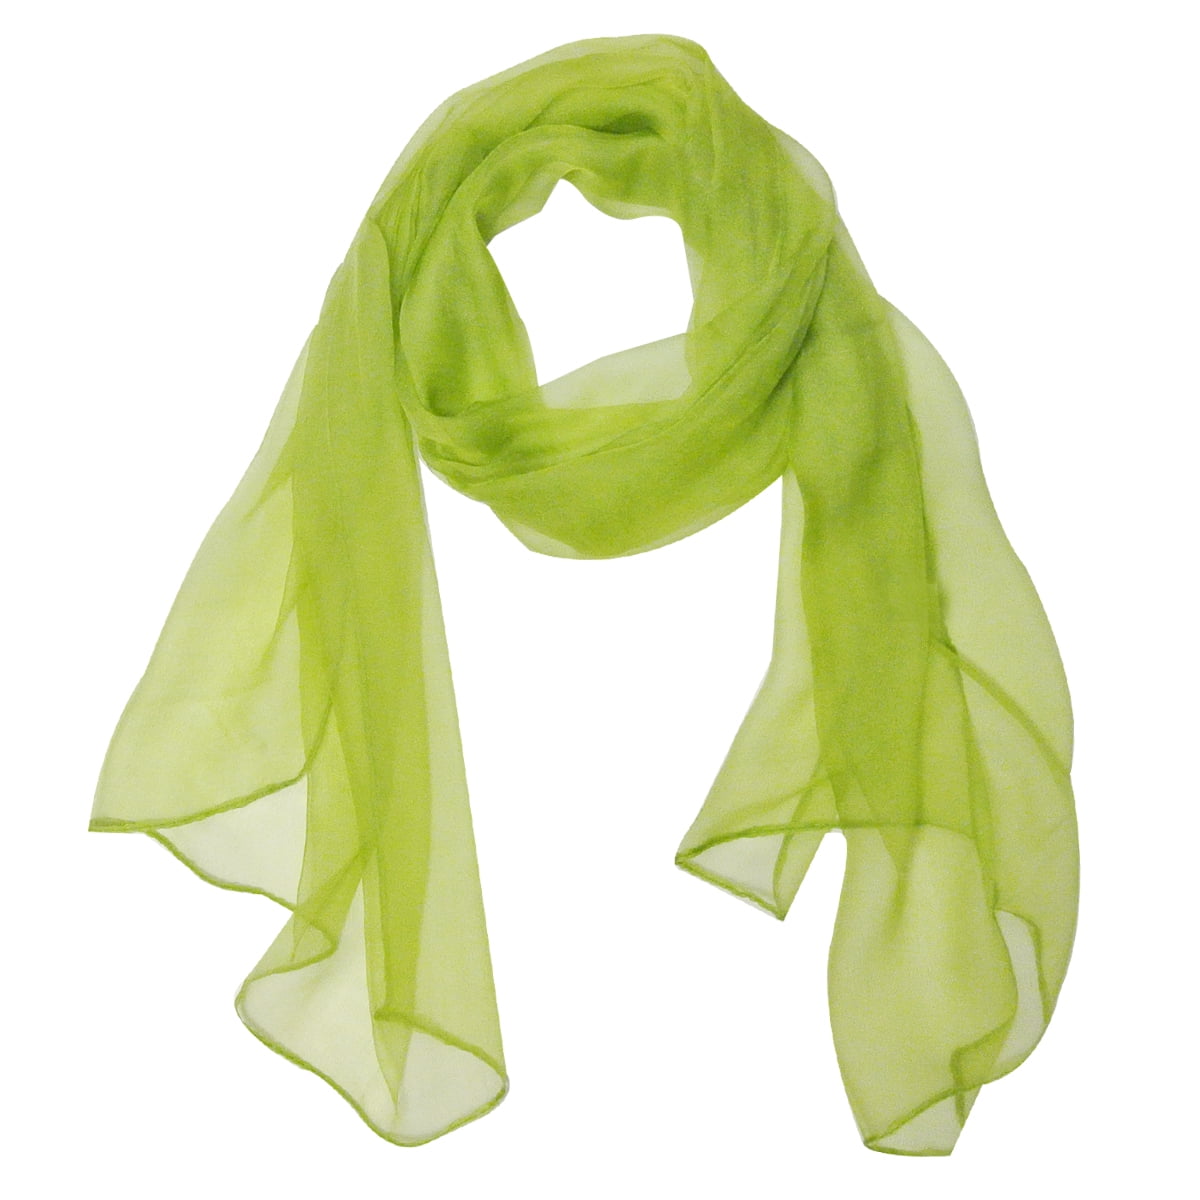 Wrapables® Solid Color 100% Silk Long Scarf, Apple Green - Walmart.com